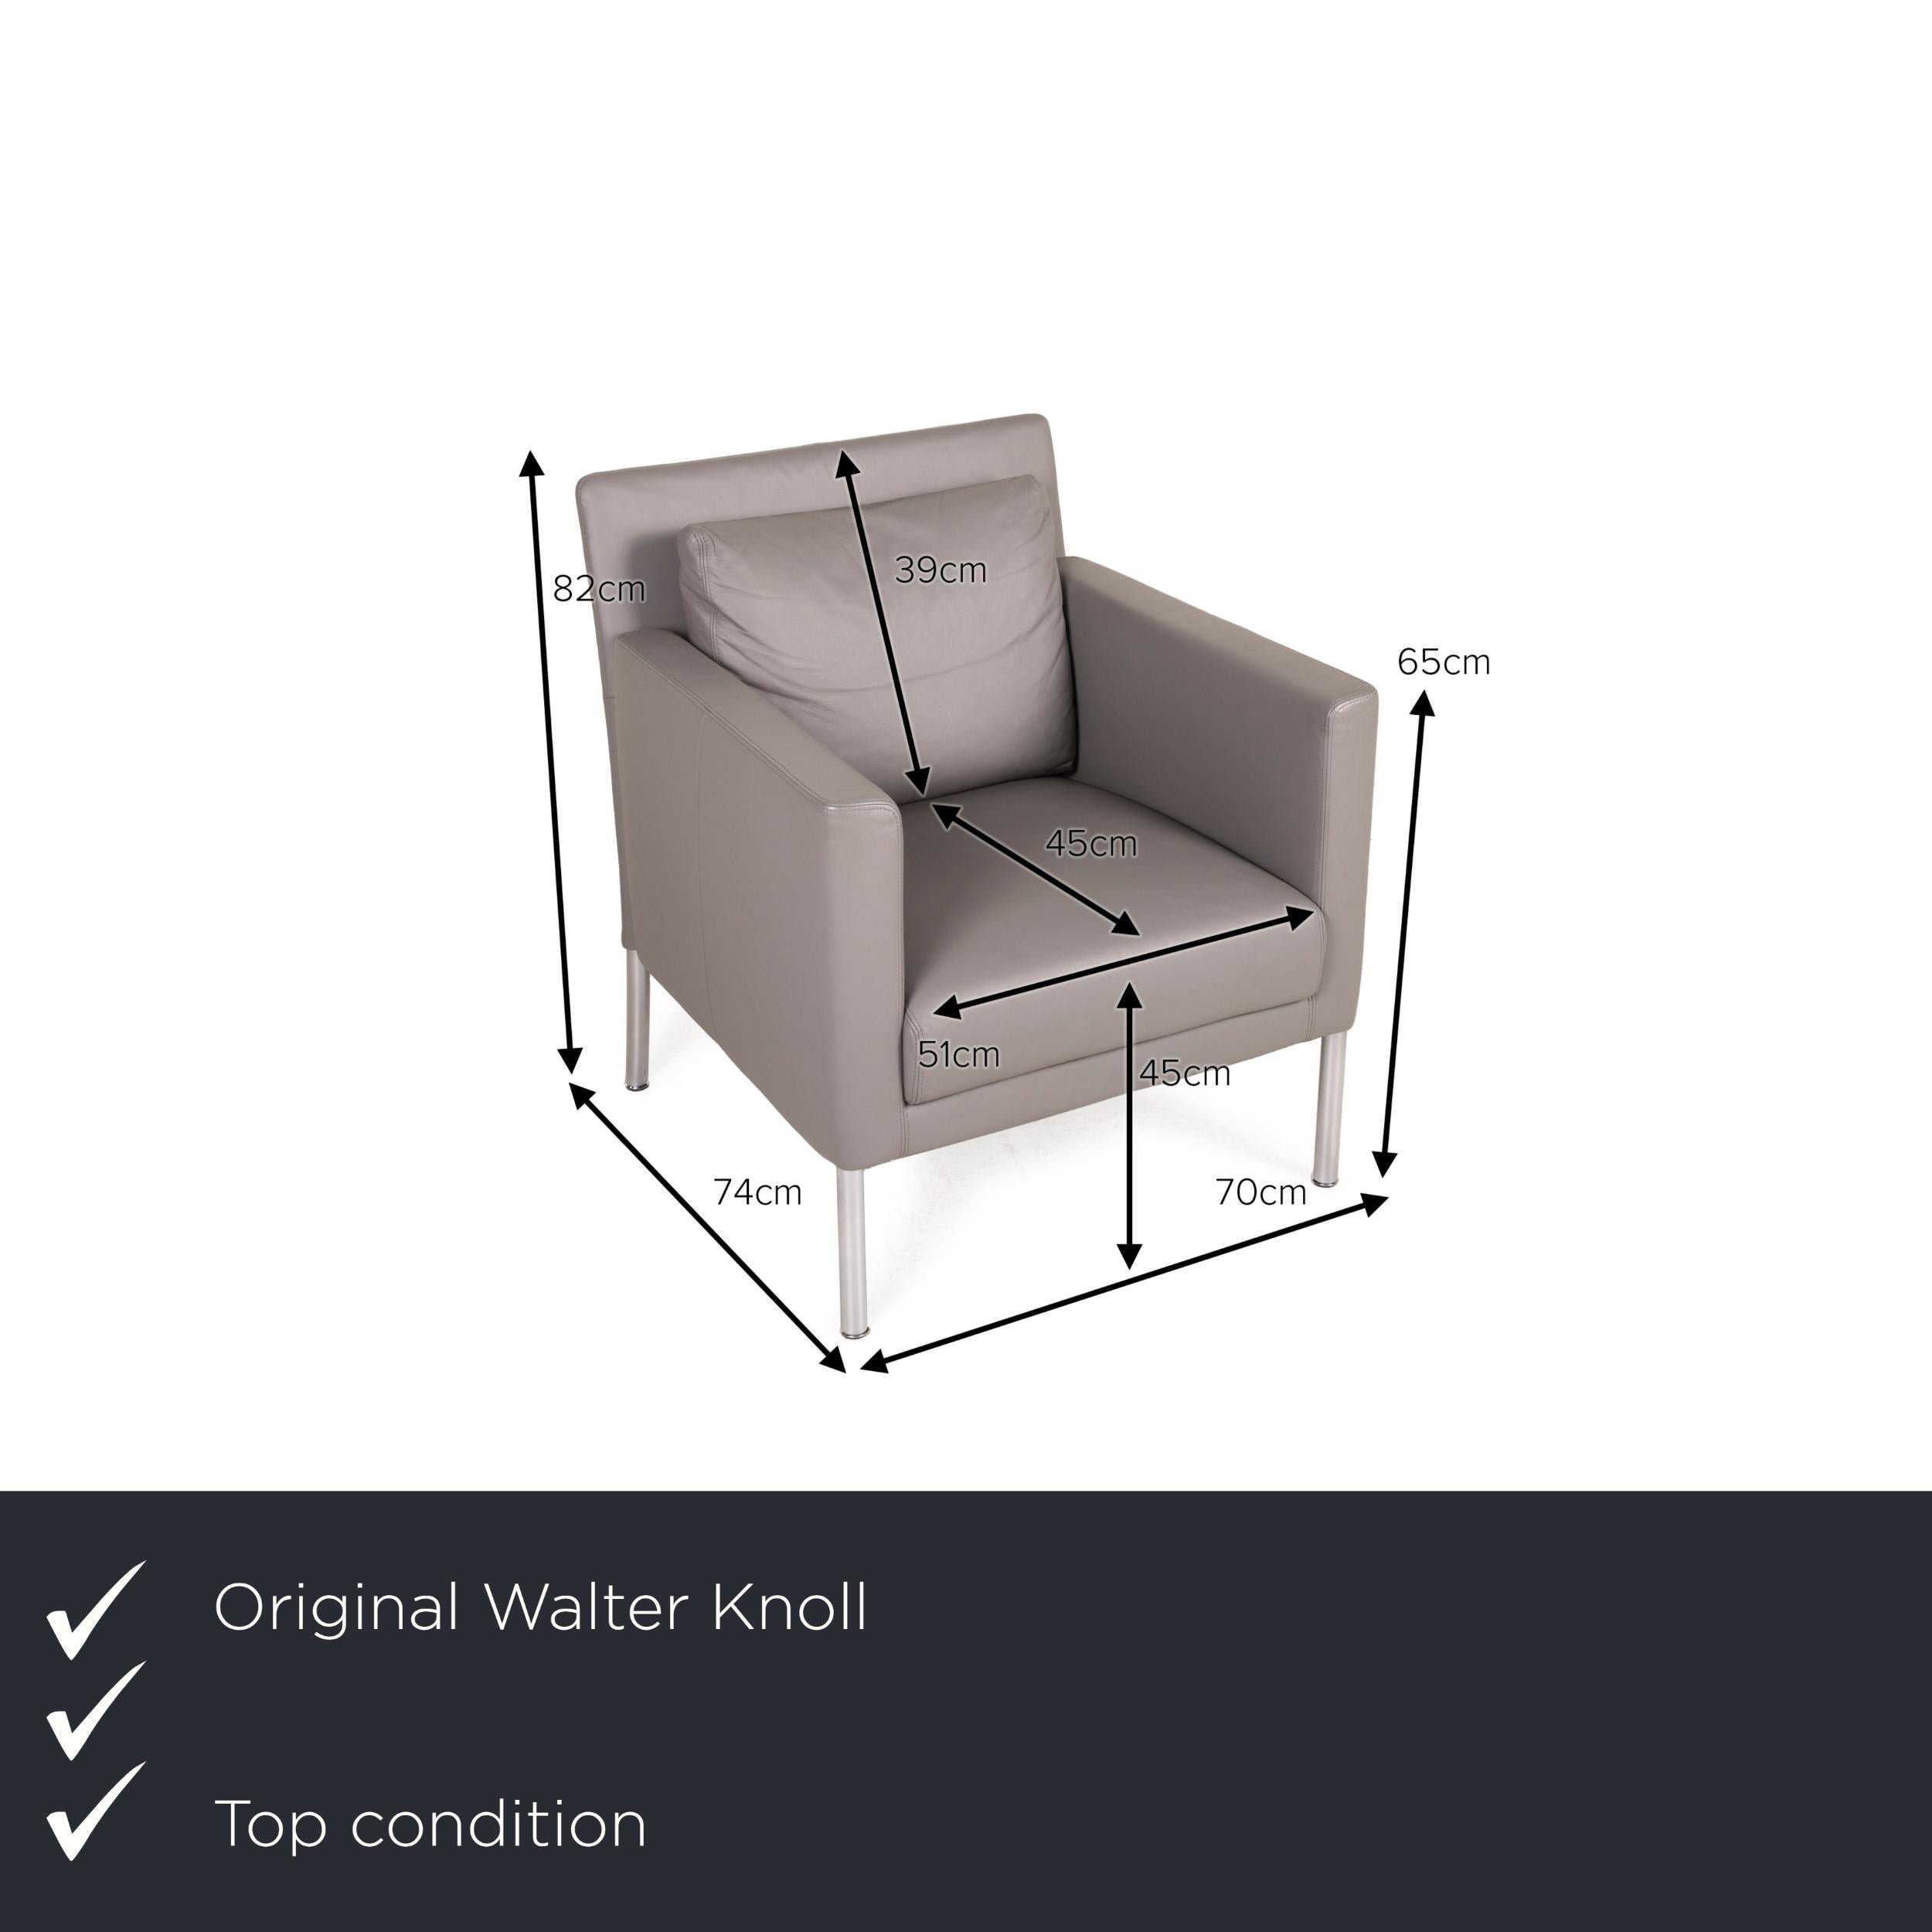 We present to you a Walter Knoll Foster 500 leather armchair gray.
 
 

 Product measurements in centimeters:
 

 depth: 74
 width: 70
 height: 82
 seat height: 45
 rest height: 65
 seat depth: 45
 seat width: 51
 back height: 39.